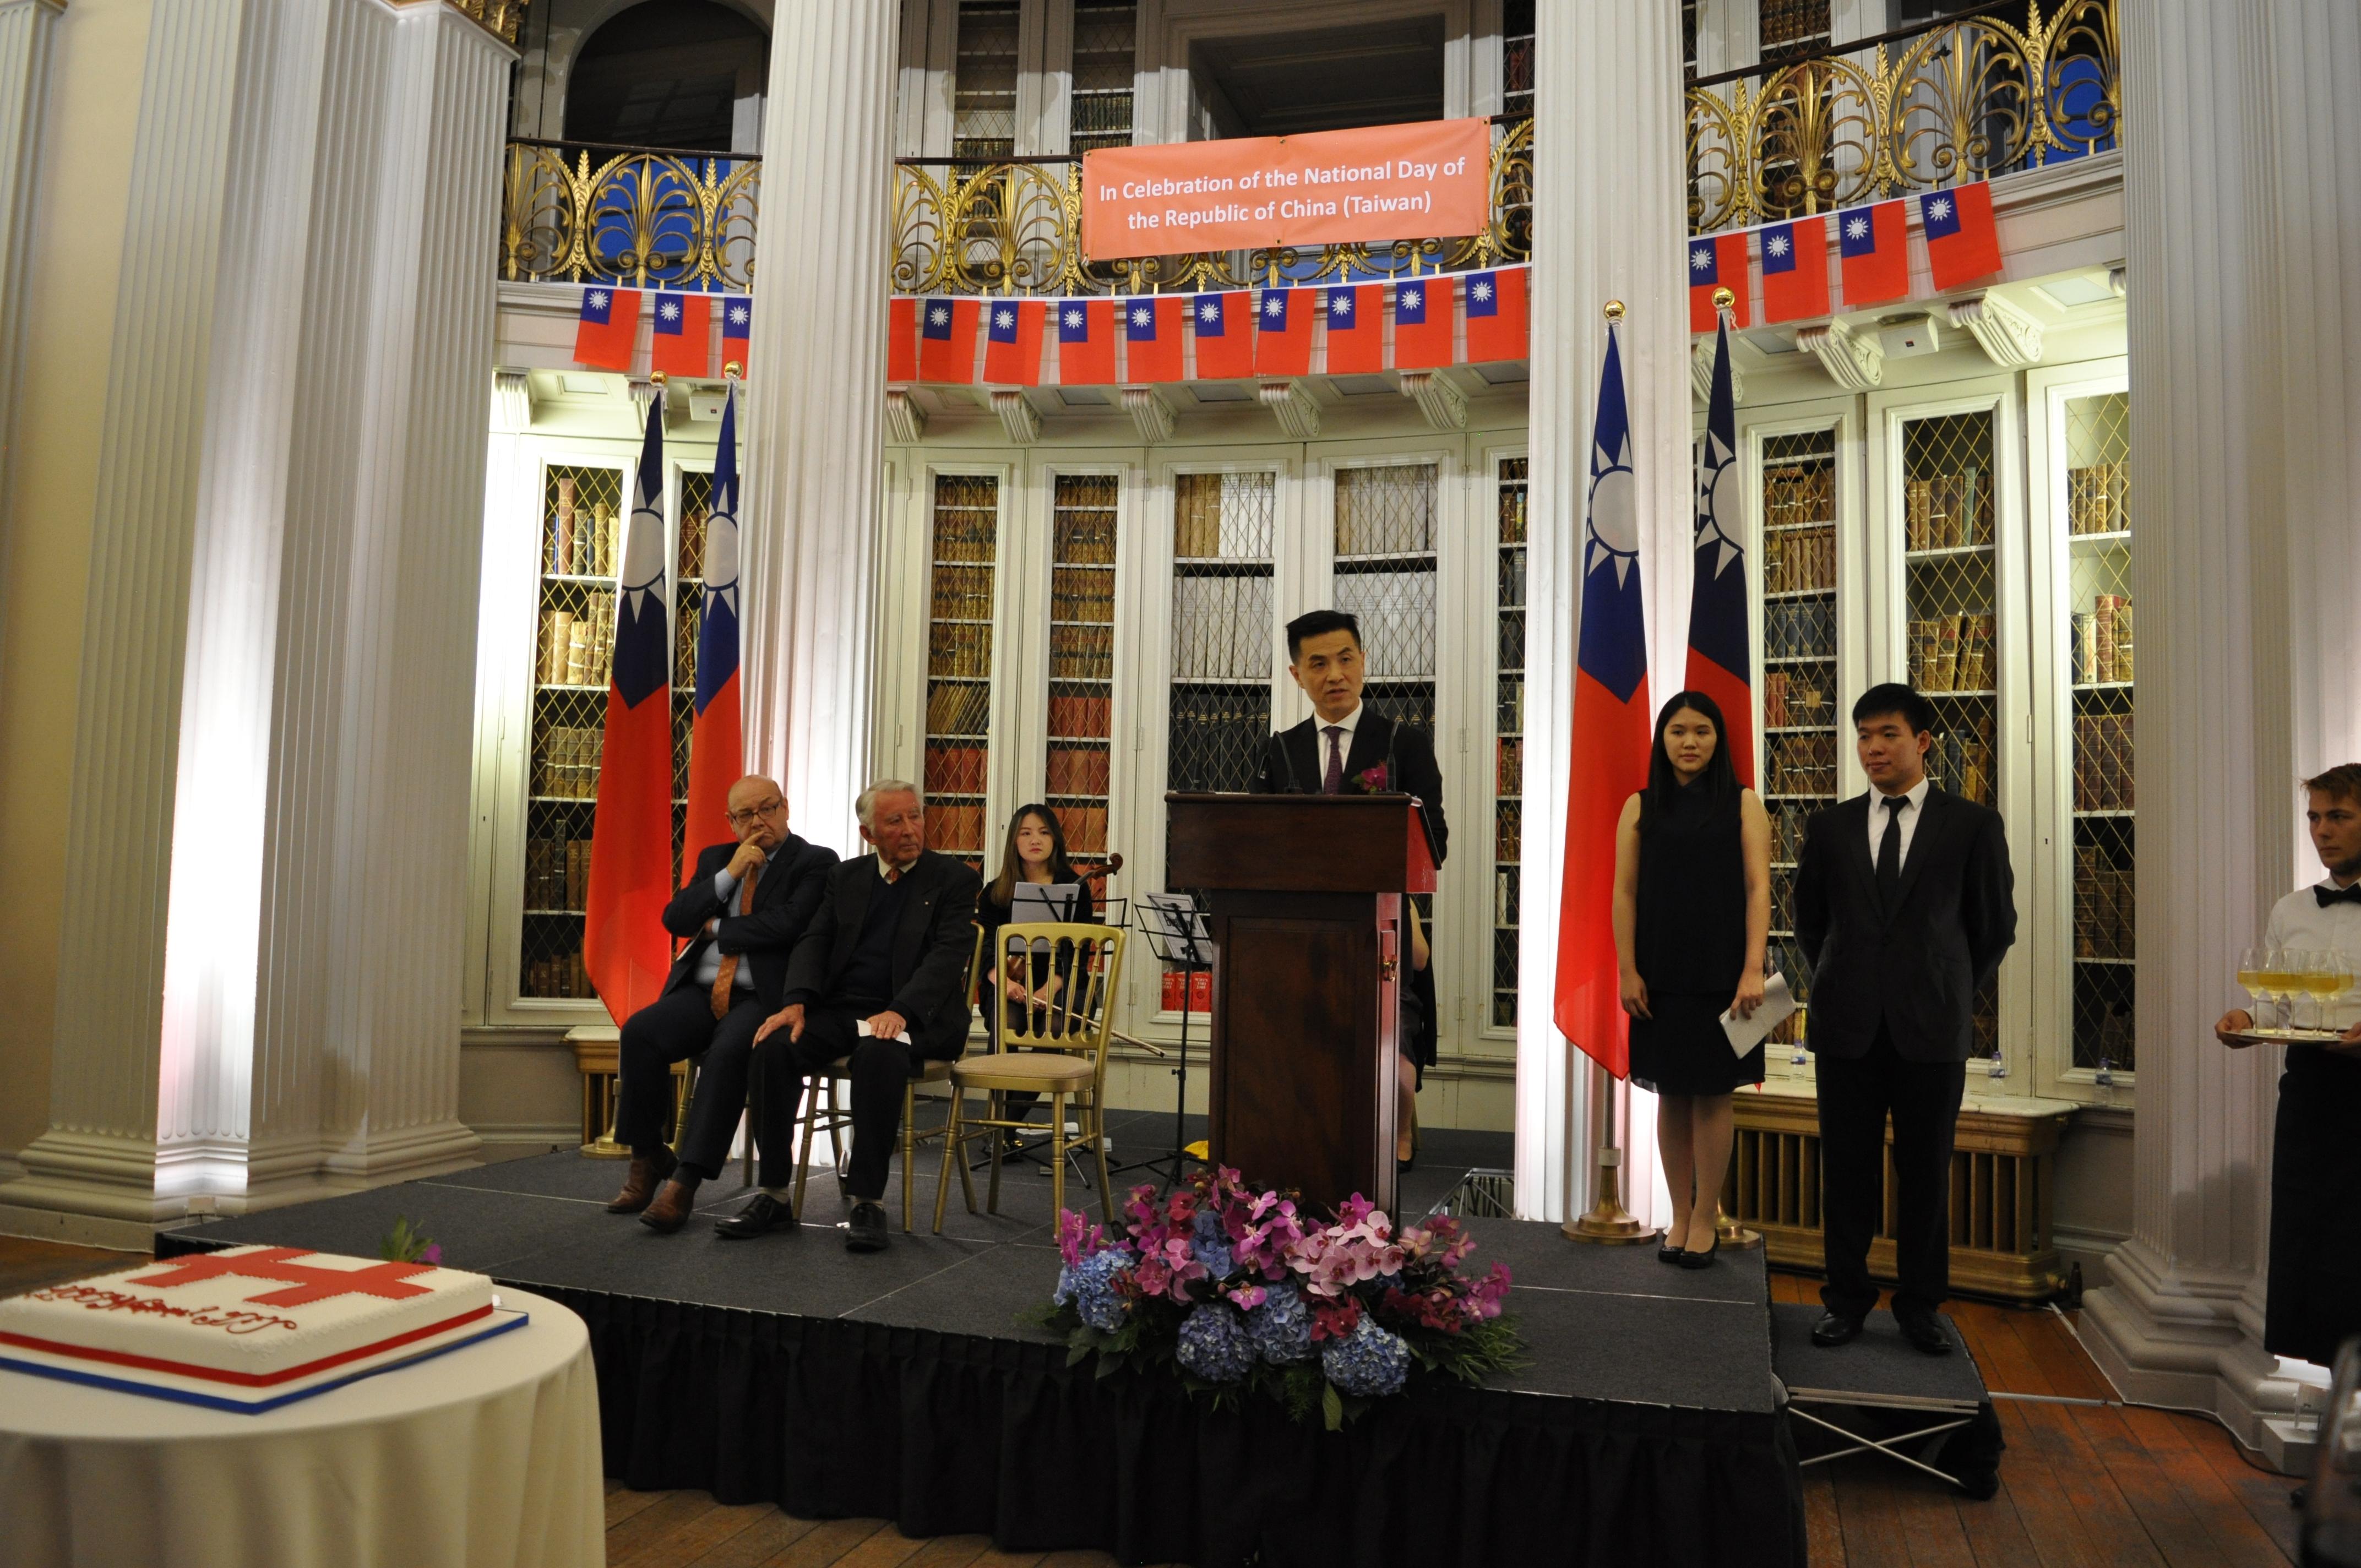 On the 4th October 2017 at the Signet Library, Edinburgh Old Town; New Director General Jason Lien of the Taipei Representative Office in the UK Edinburgh Office gives his welcome remarks.